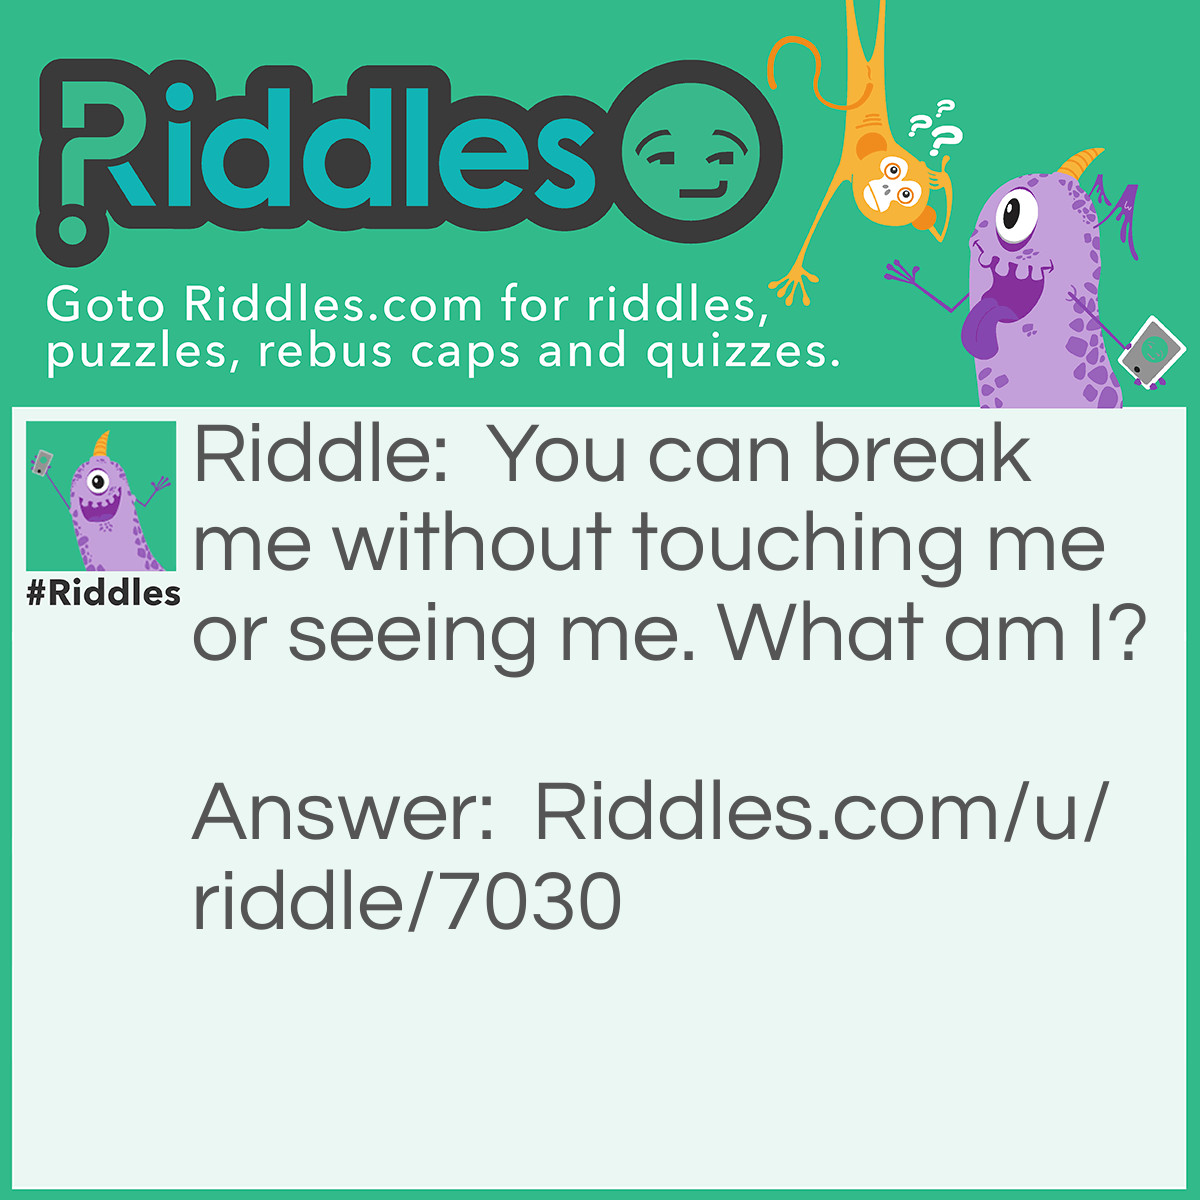 Riddle: You can break me without touching me or seeing me. What am I? Answer: A Promise.